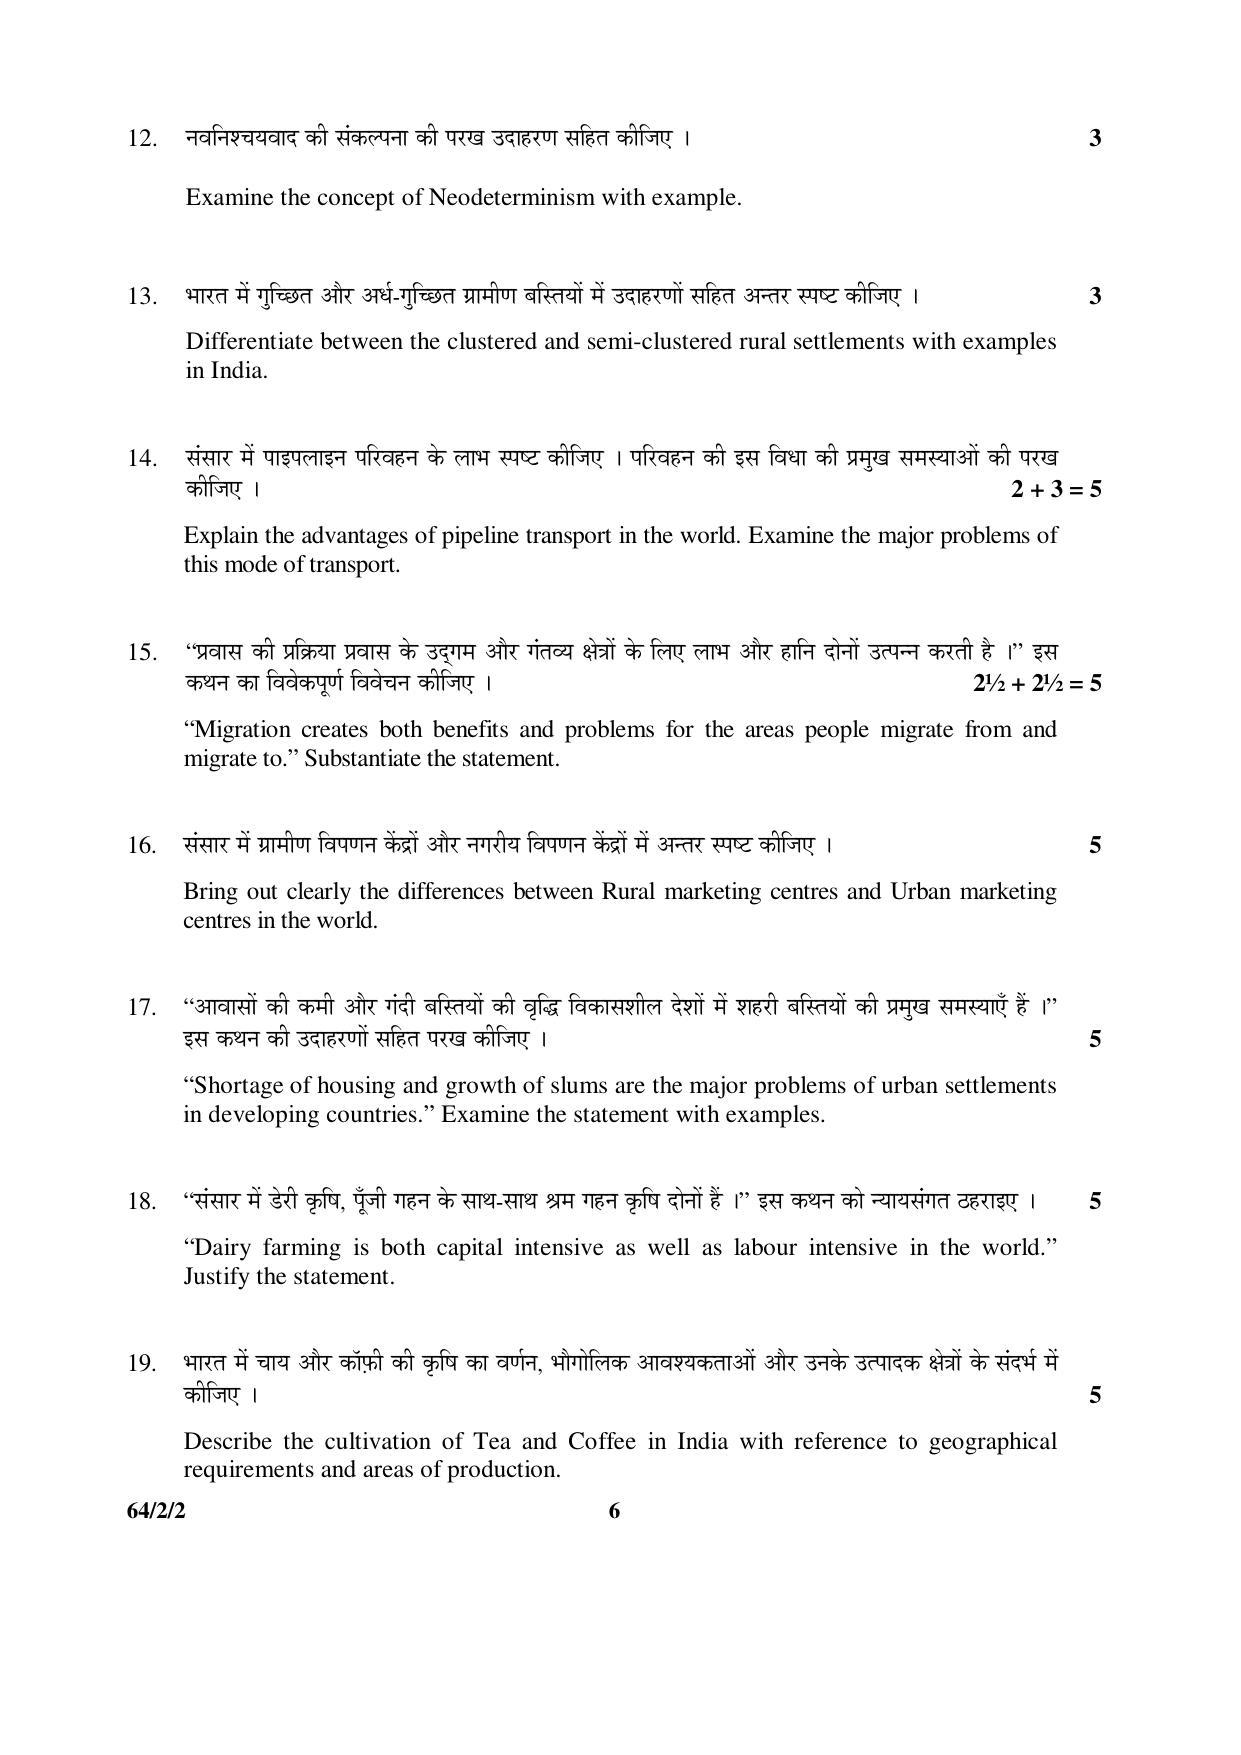 CBSE Class 12 64-2-2 Geography 2016 Question Paper - Page 6